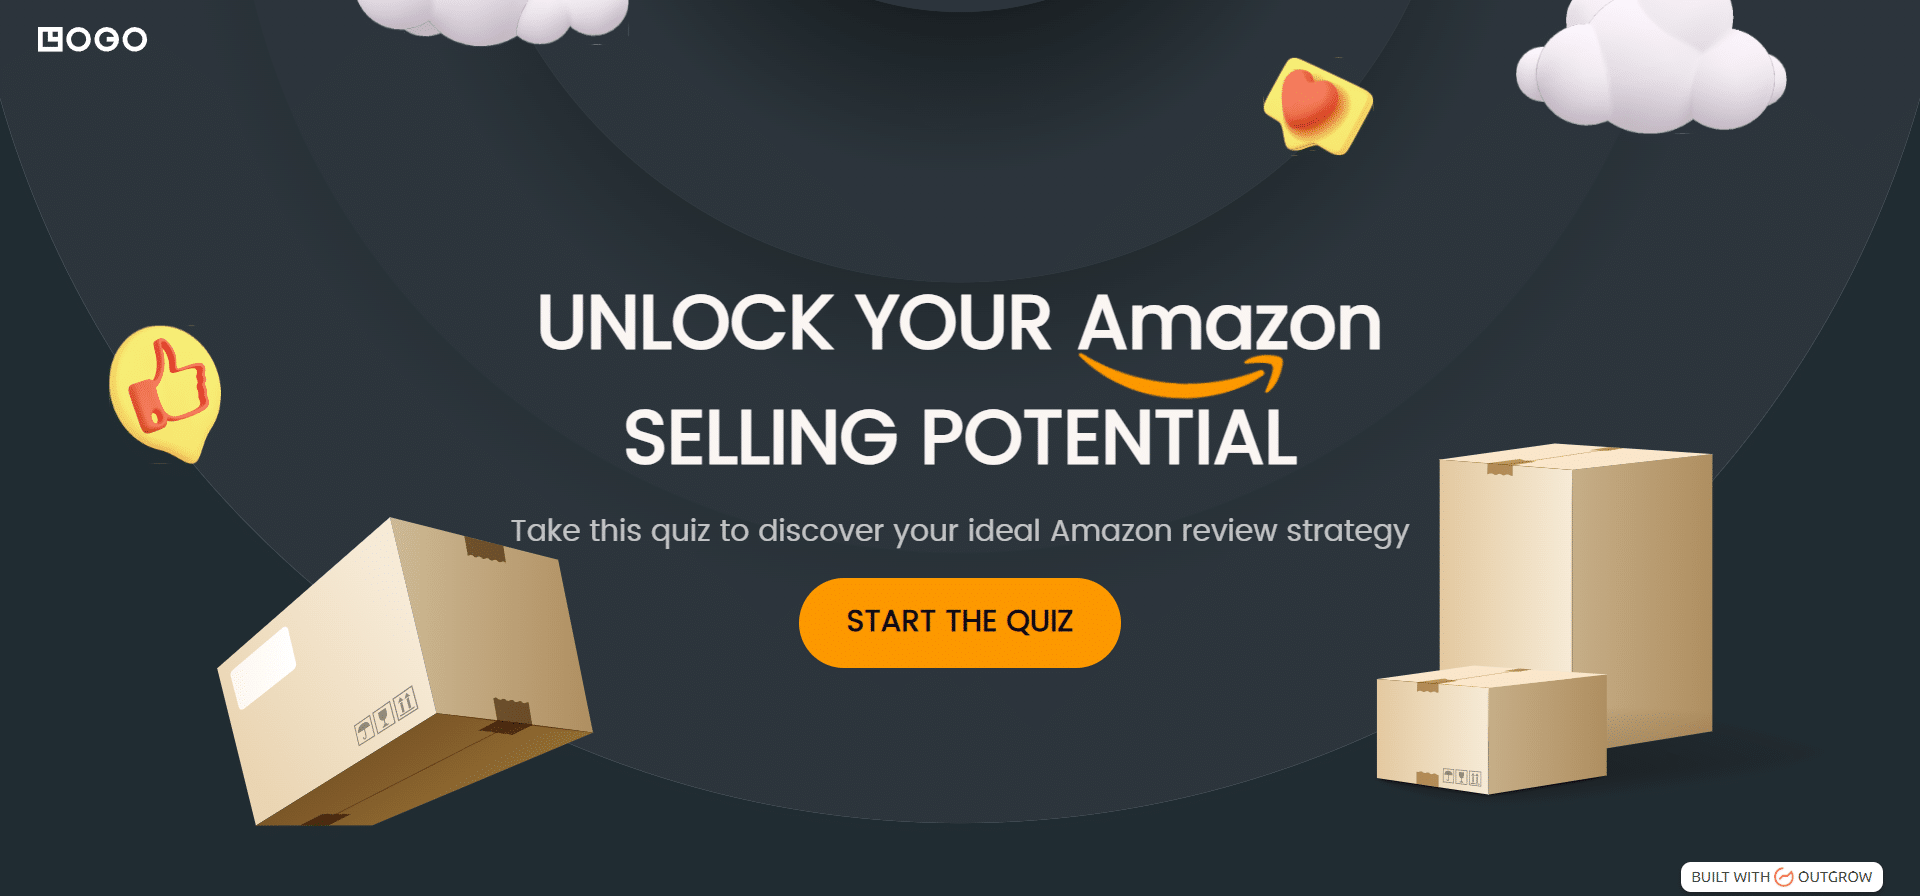 UNLOCK YOUR Amazon SELLING POTENTIAL